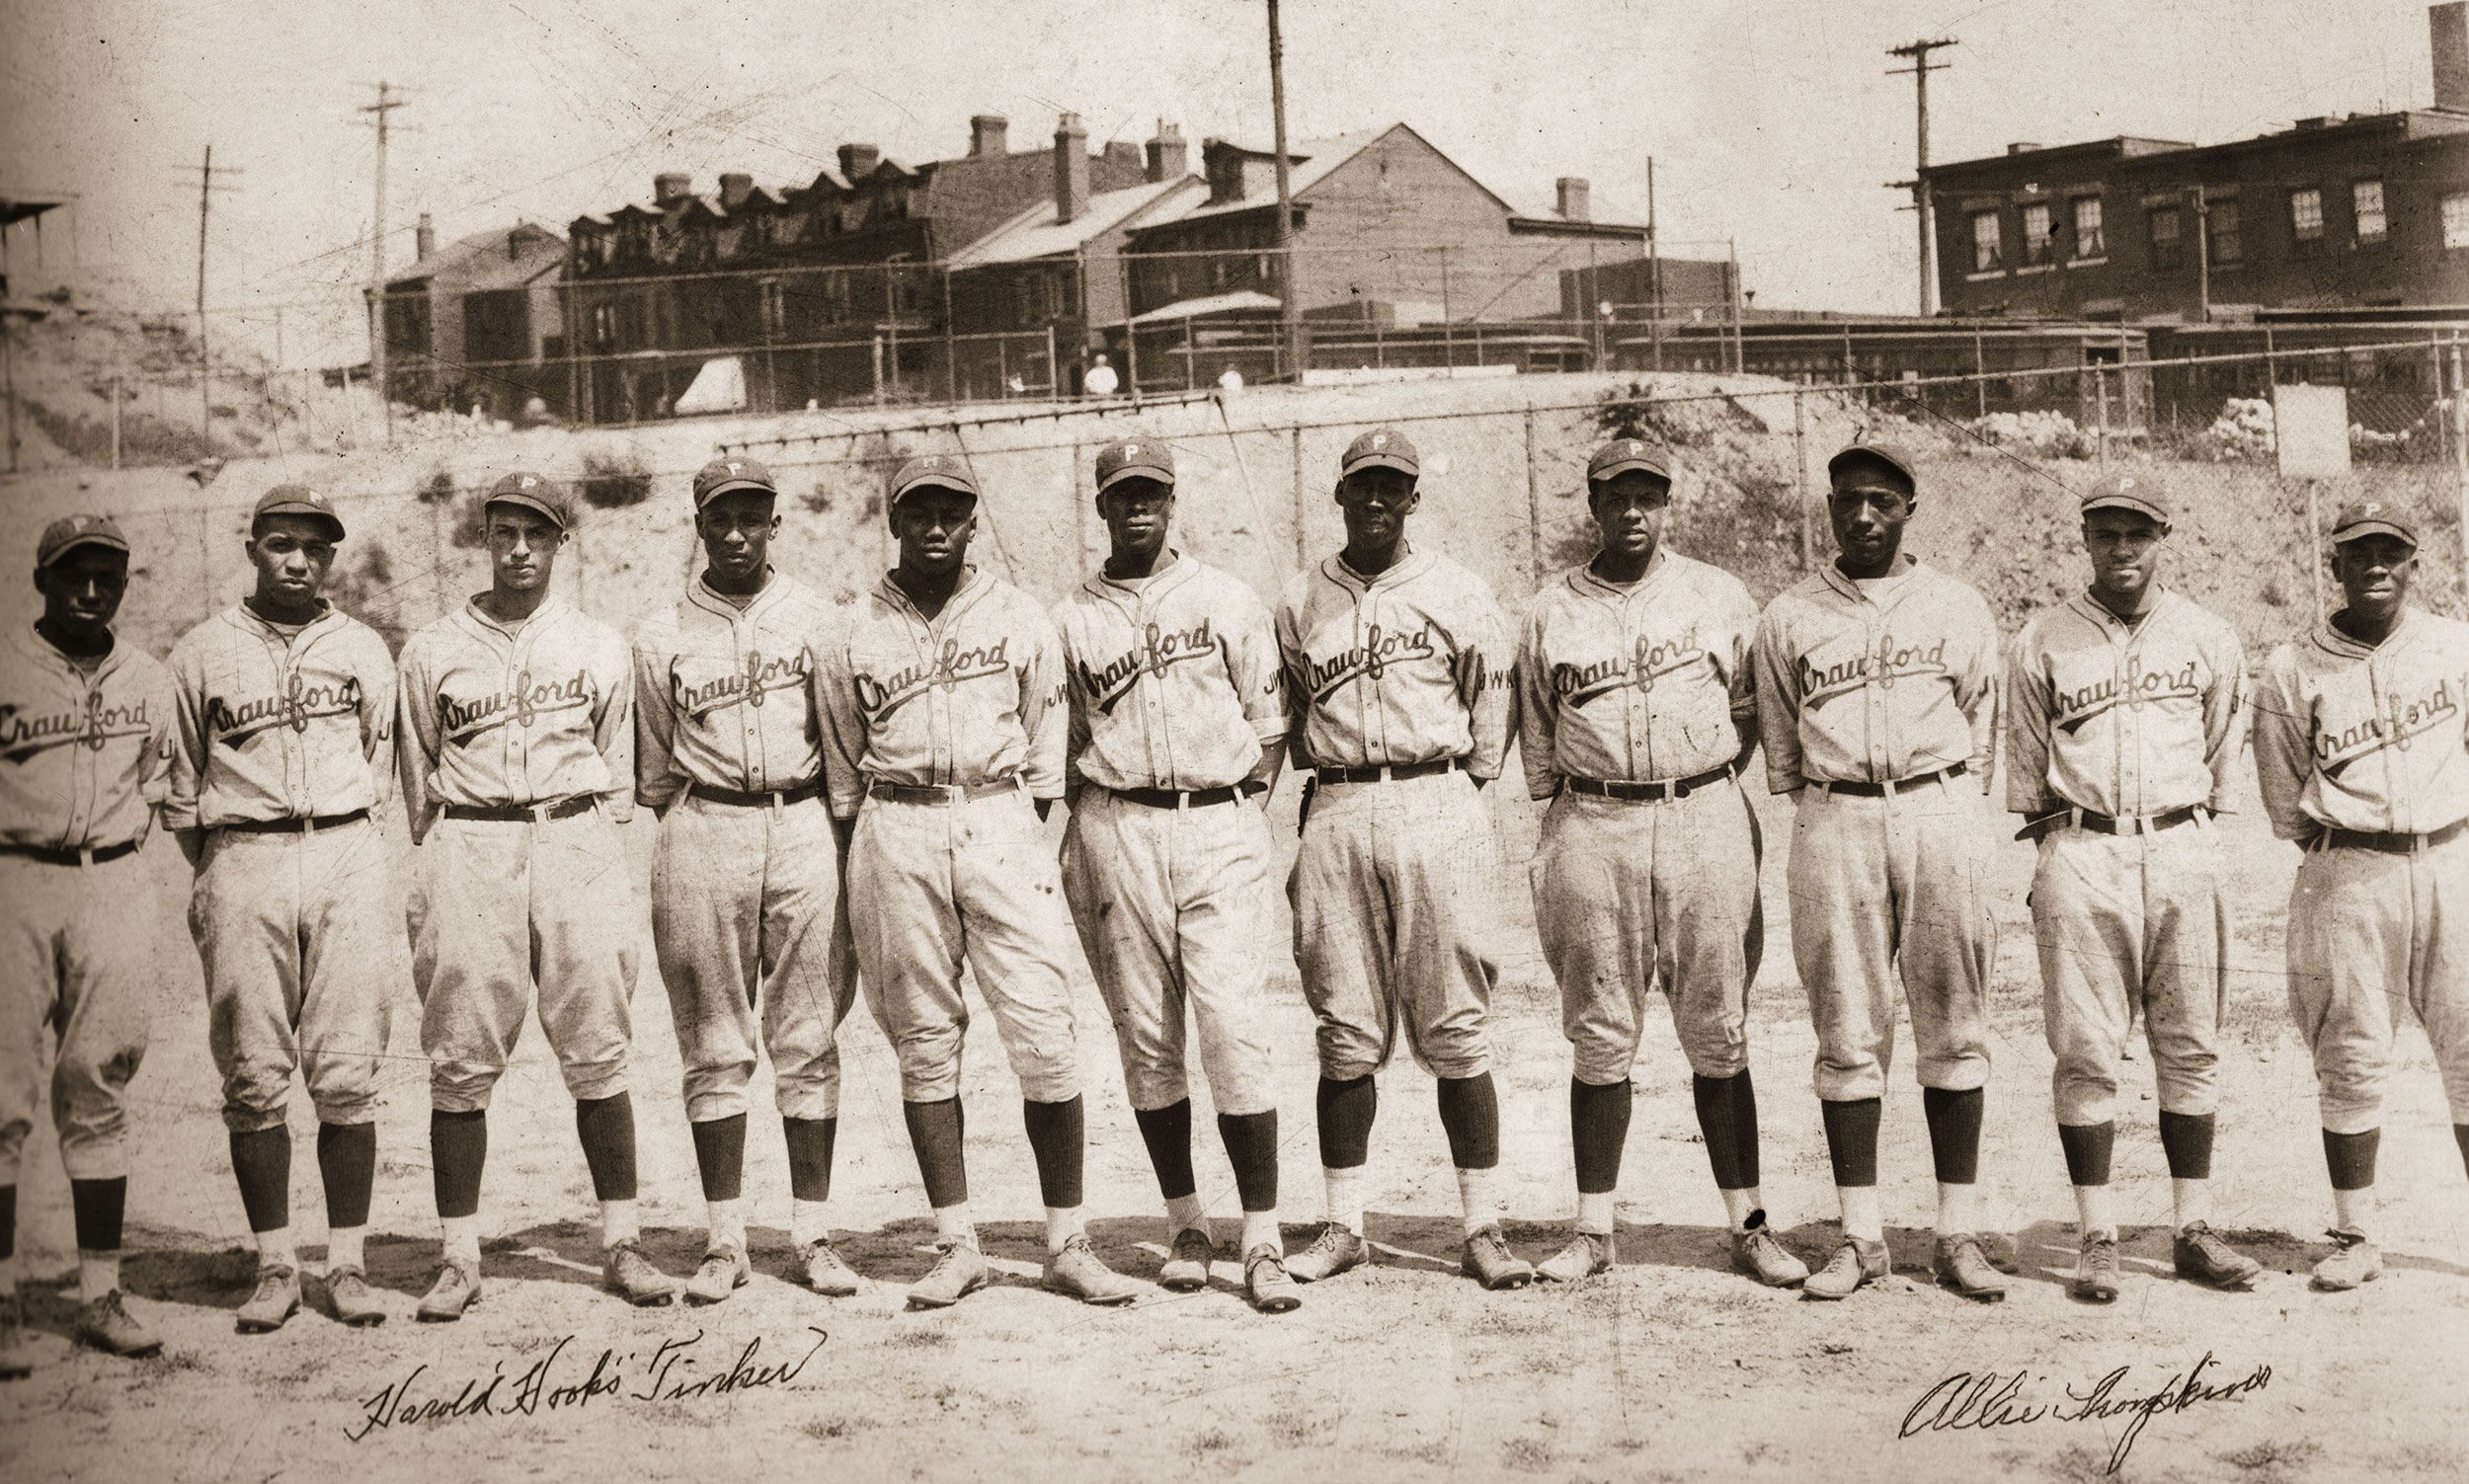 The Negro Leagues were added to official MLB records. But don't